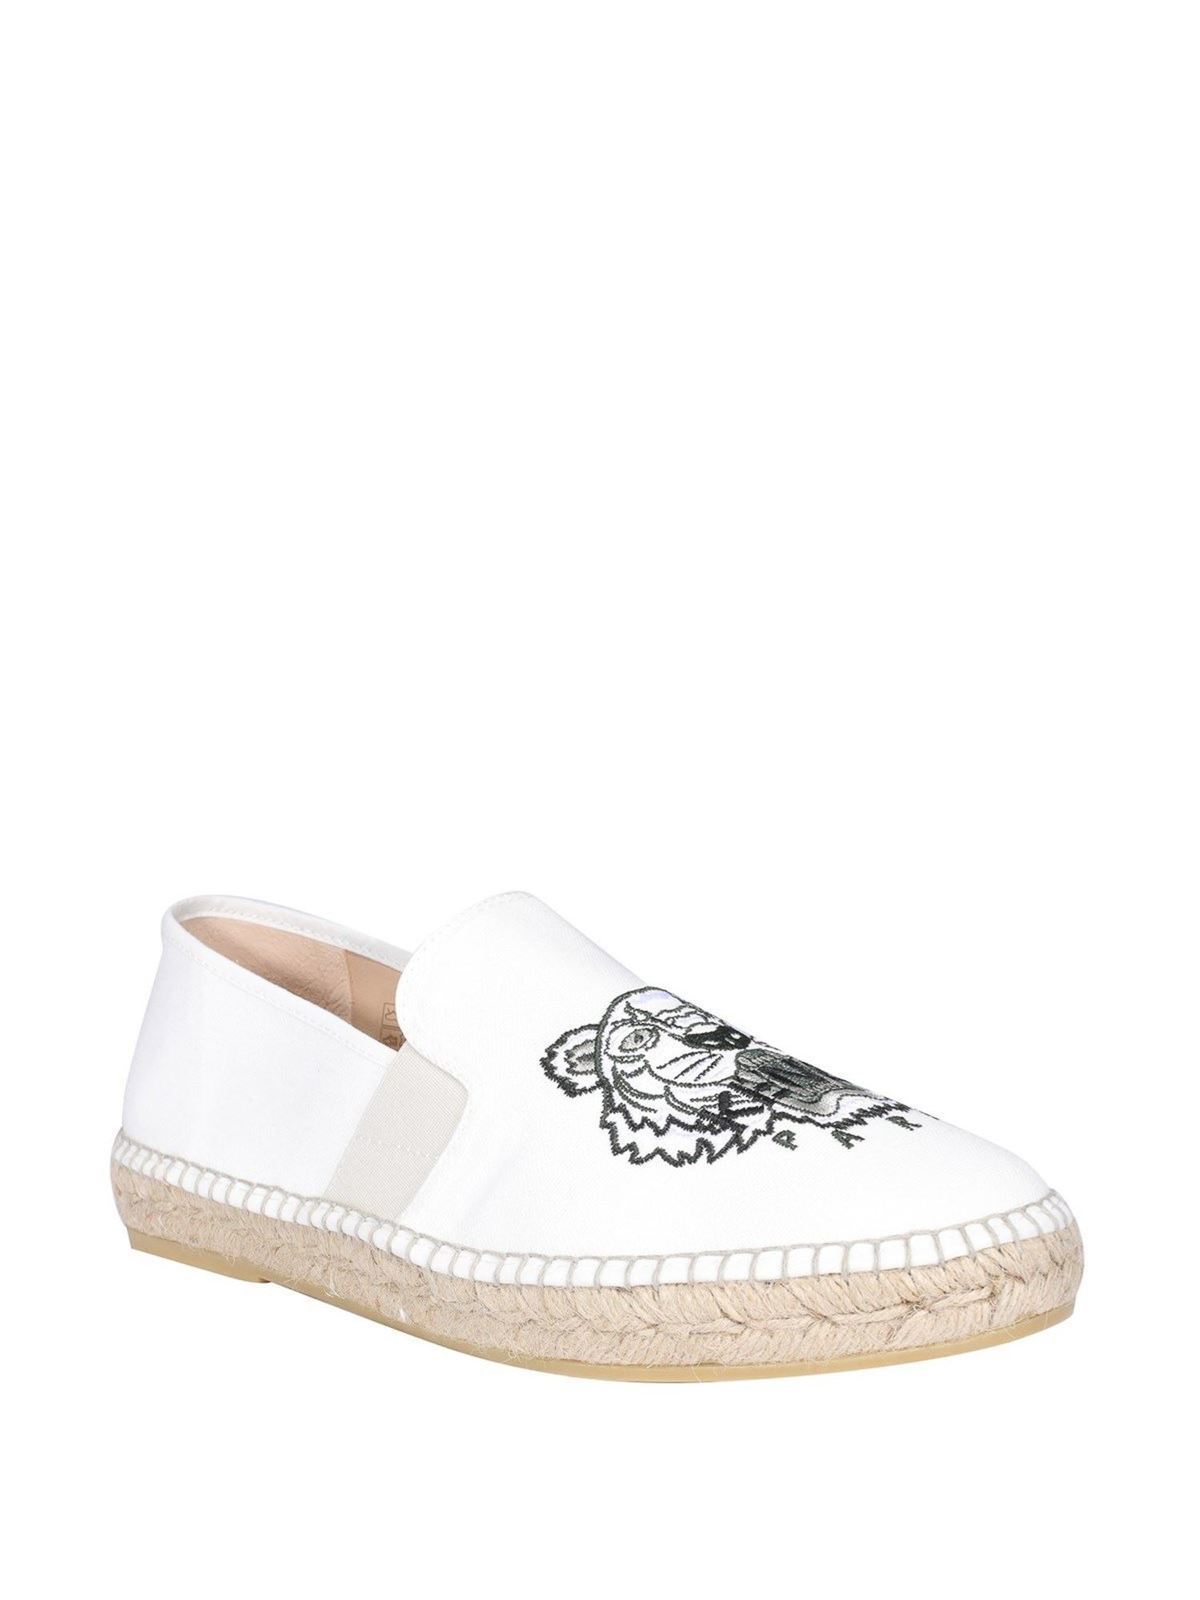 Jumping jack blok Controle Espadrilles Kenzo - Tiger embroidered espadrilles in white - FB55ES188F7002